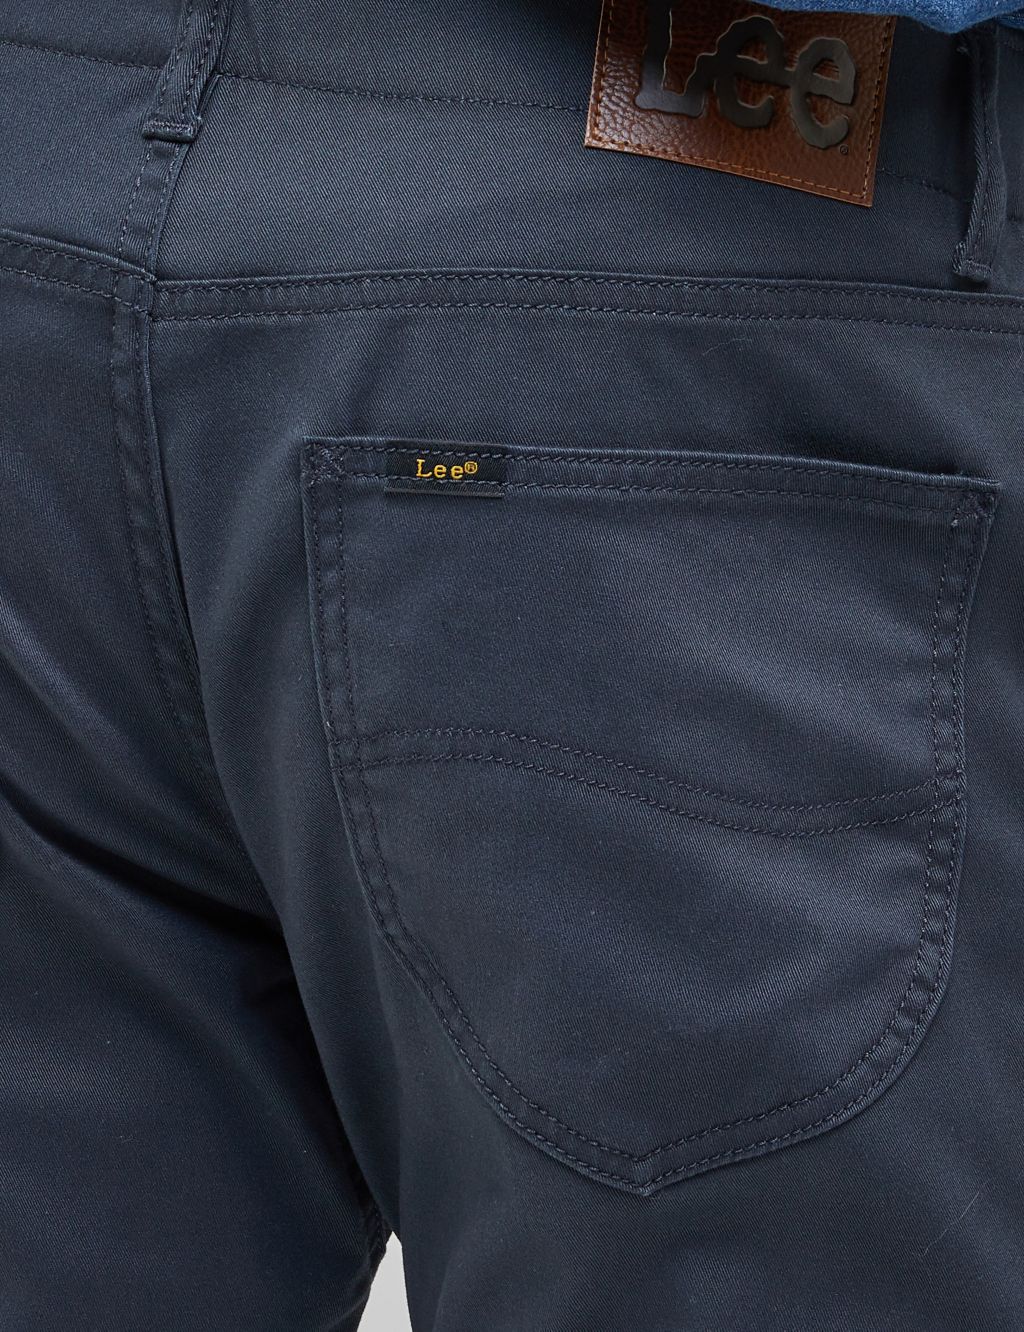 Straight Fit 5 Pocket Jeans image 5